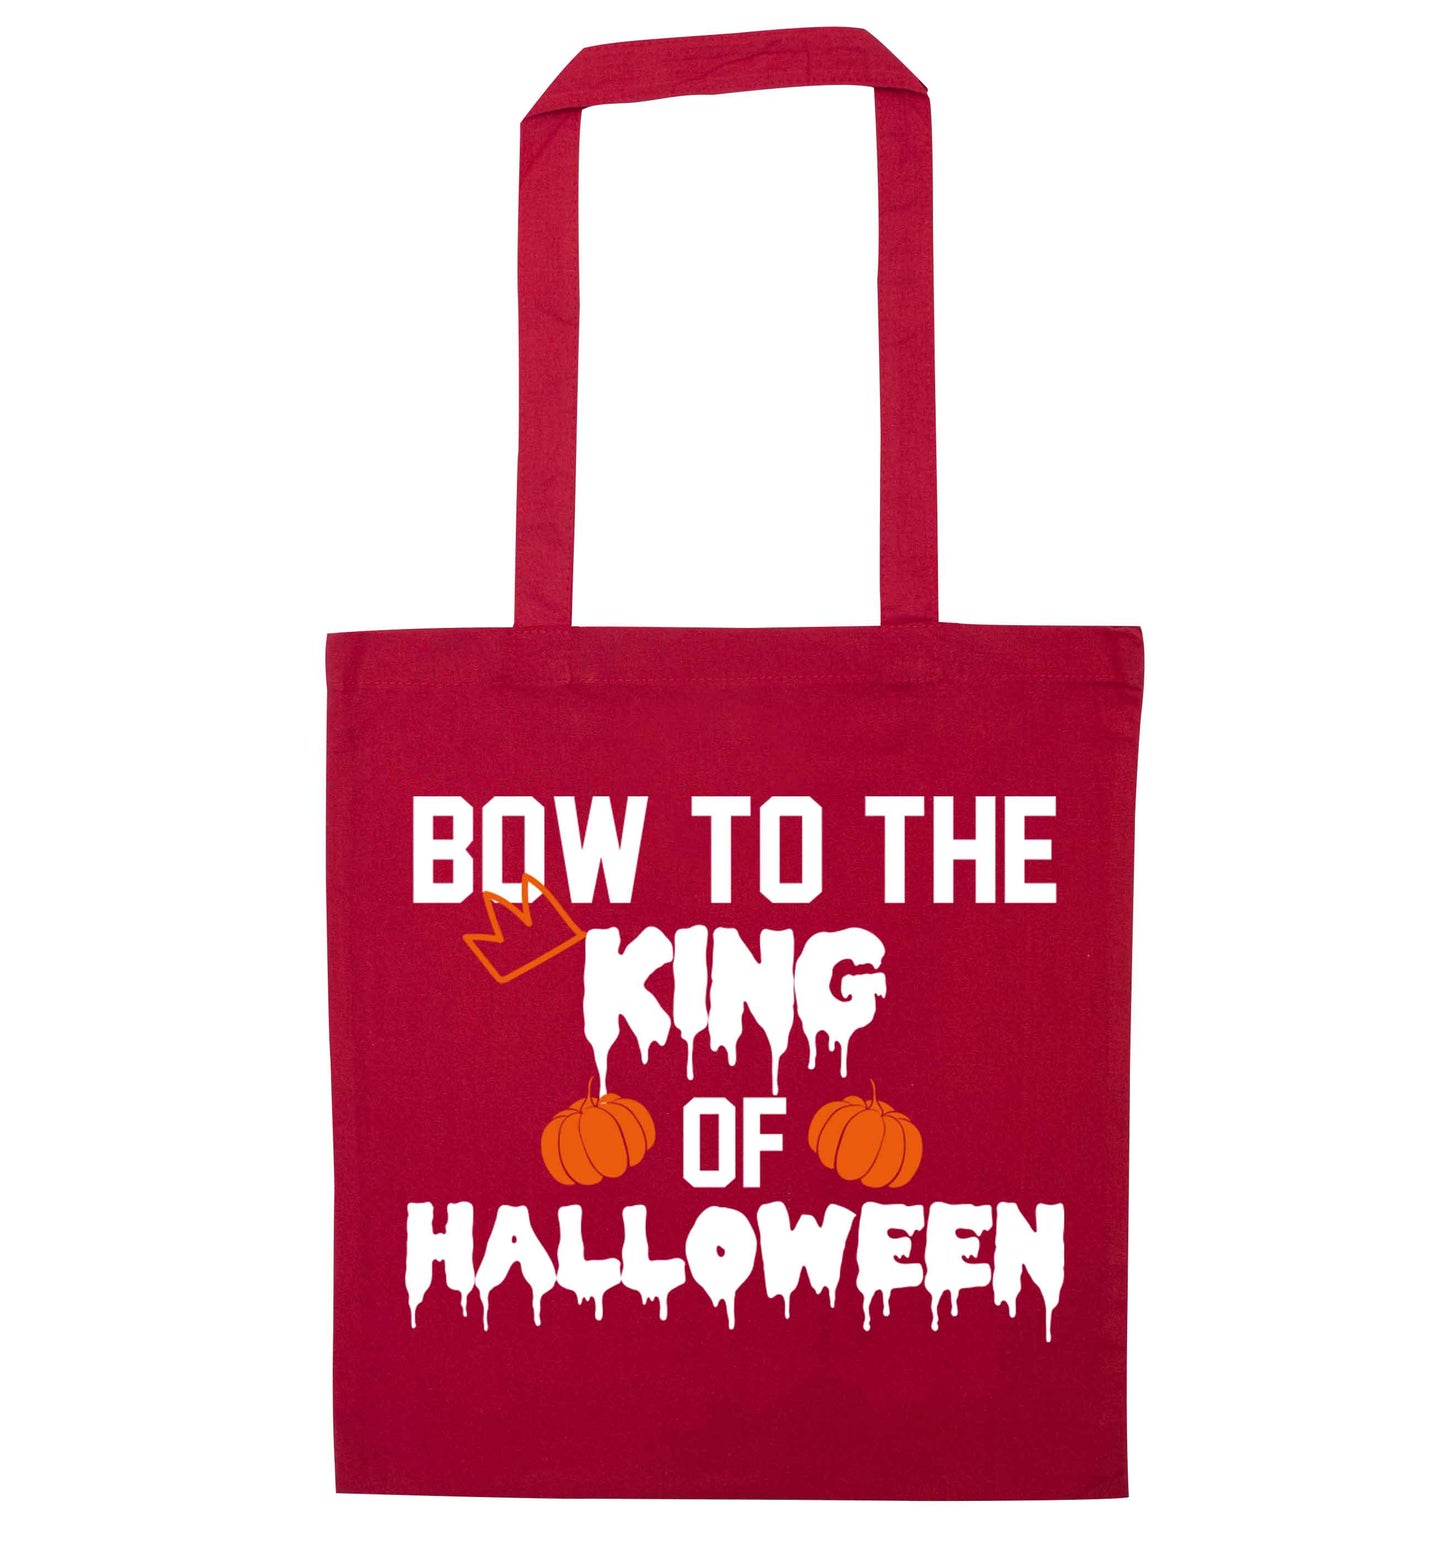 Bow to the King of halloween red tote bag